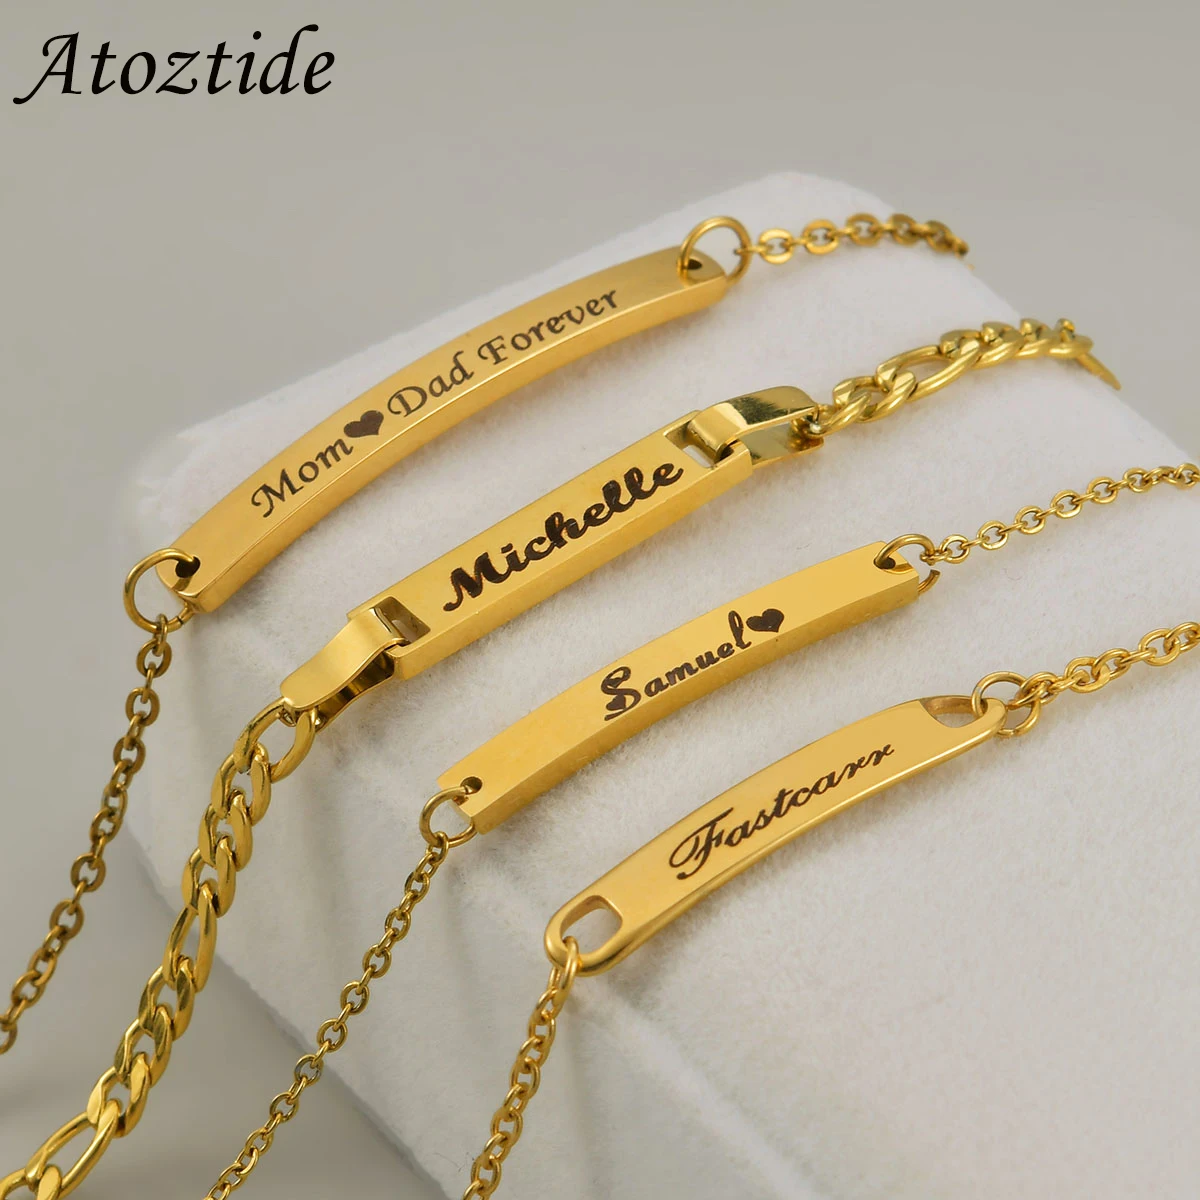 Atoztide Custom Baby Name Bar Nameplate Bracelet For Stainless Steel Women Kids Adjustable Link Chain Personalized Jewelry Gift bowith custom link for our dear customer